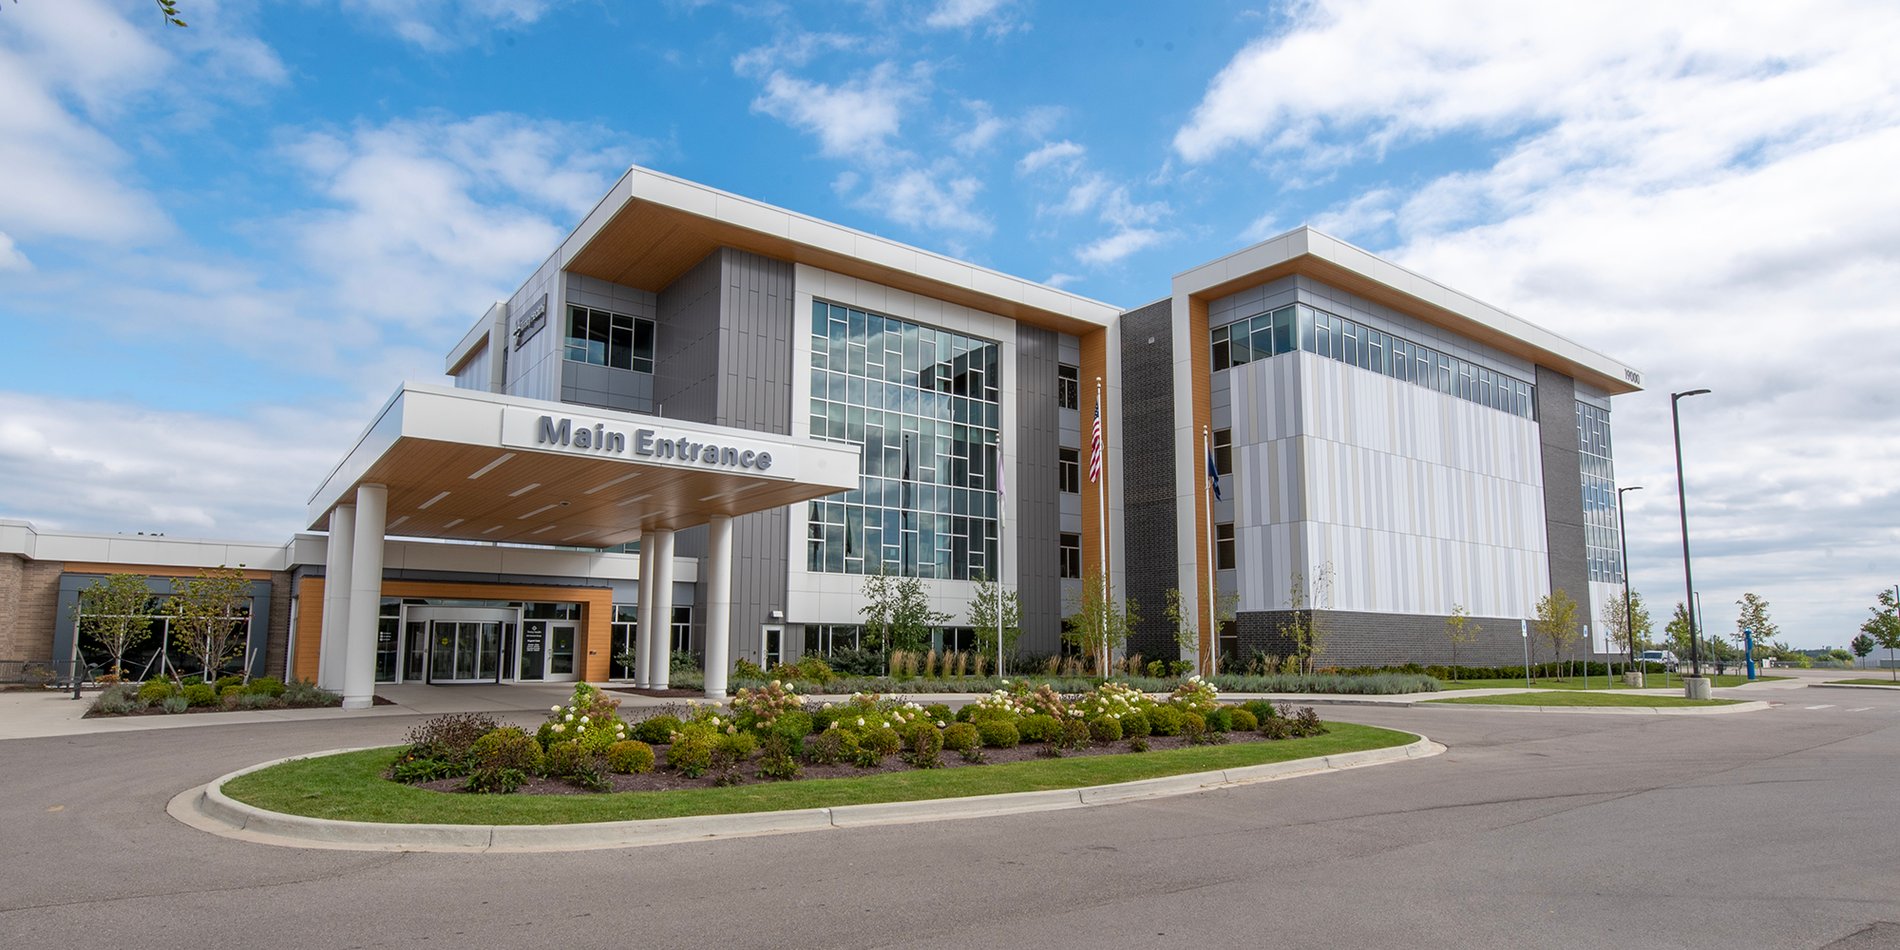 Trinity Health IHA Medical Group, Primary Care - Schoolcraft Campus is located in the Livonia Medical Center of Schoolcraft College